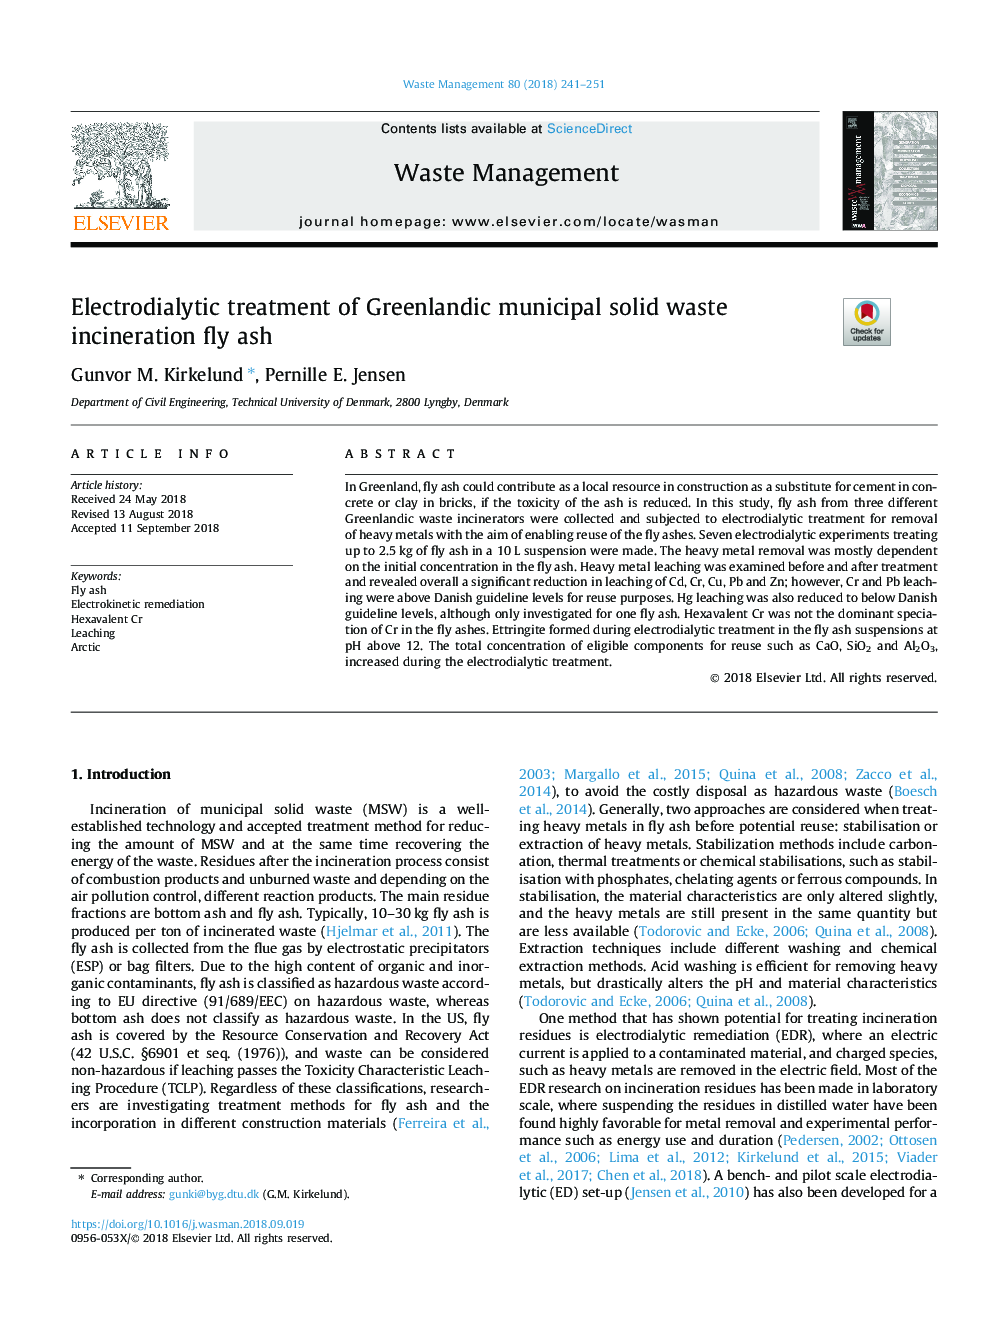 Electrodialytic treatment of Greenlandic municipal solid waste incineration fly ash